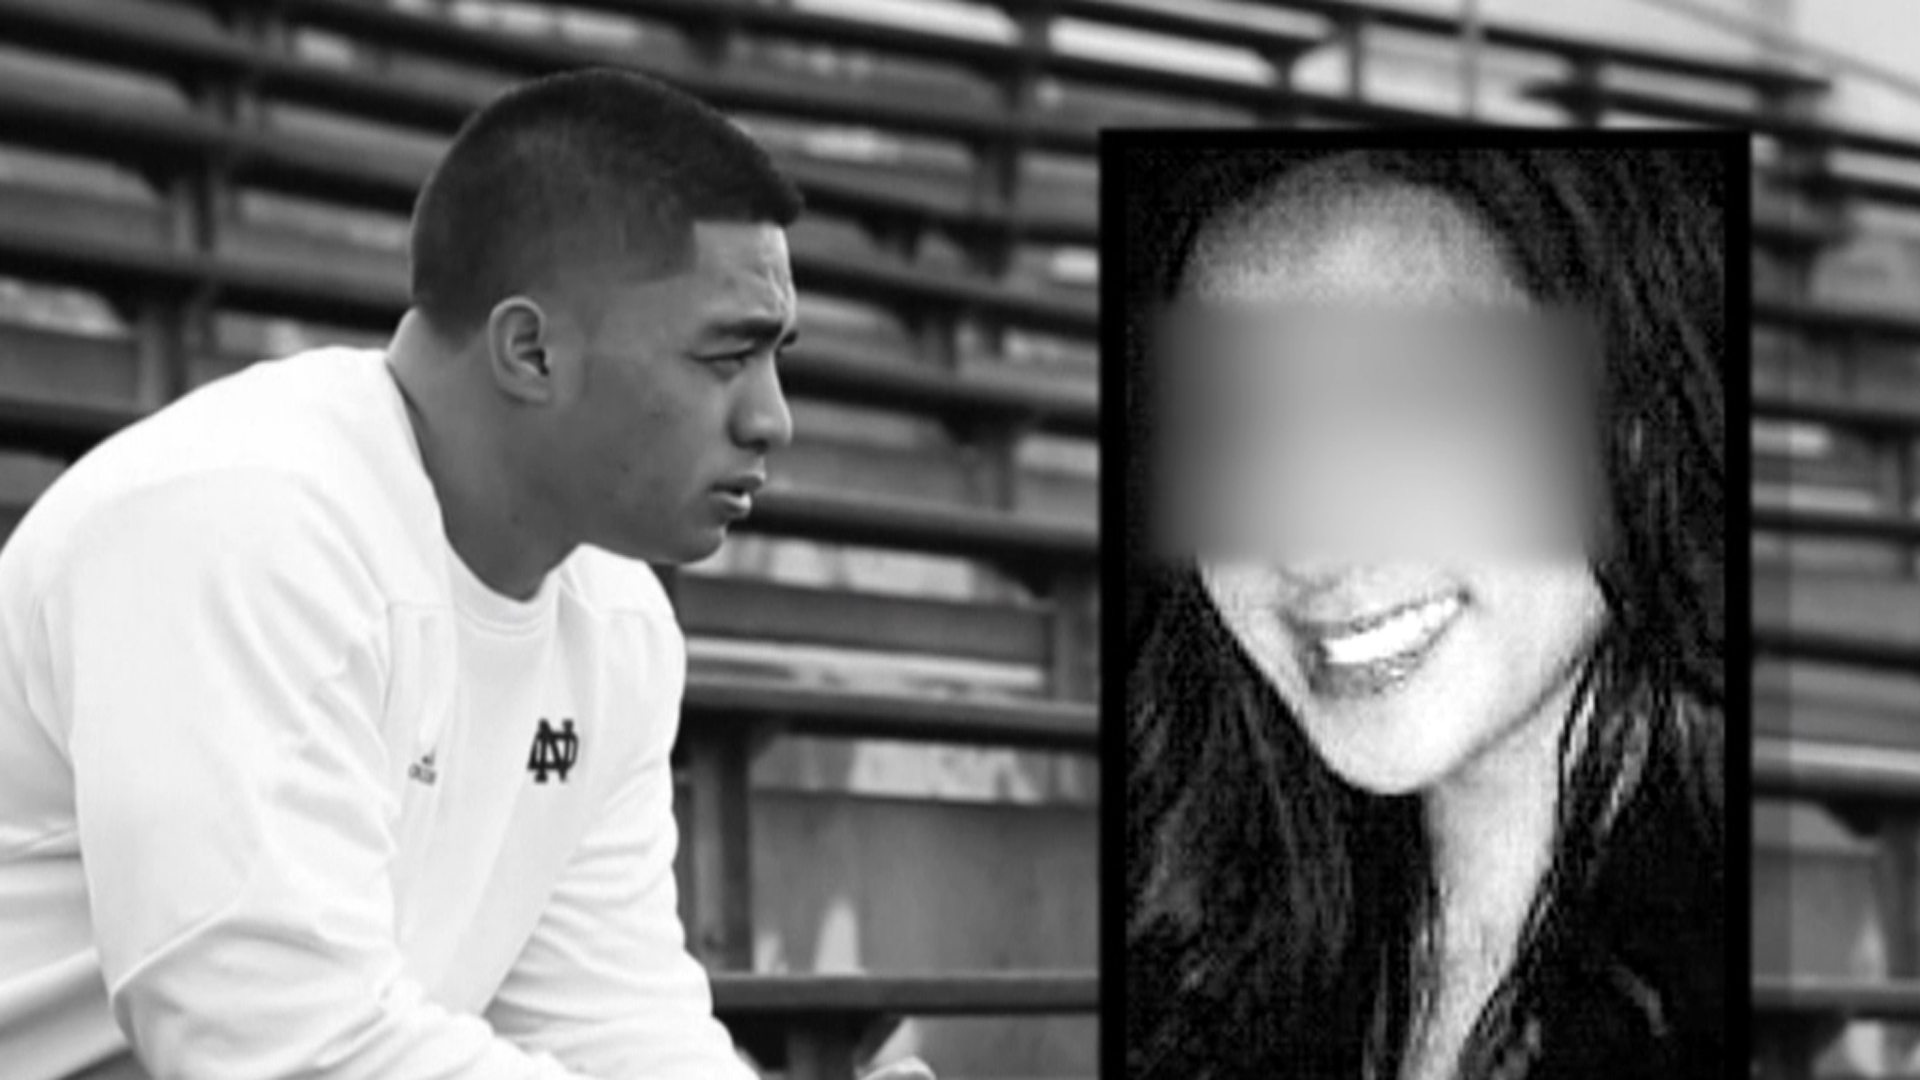 Diane Omeara Woman In Fake Manti Teo Girlfriend Photo Speaks Out 